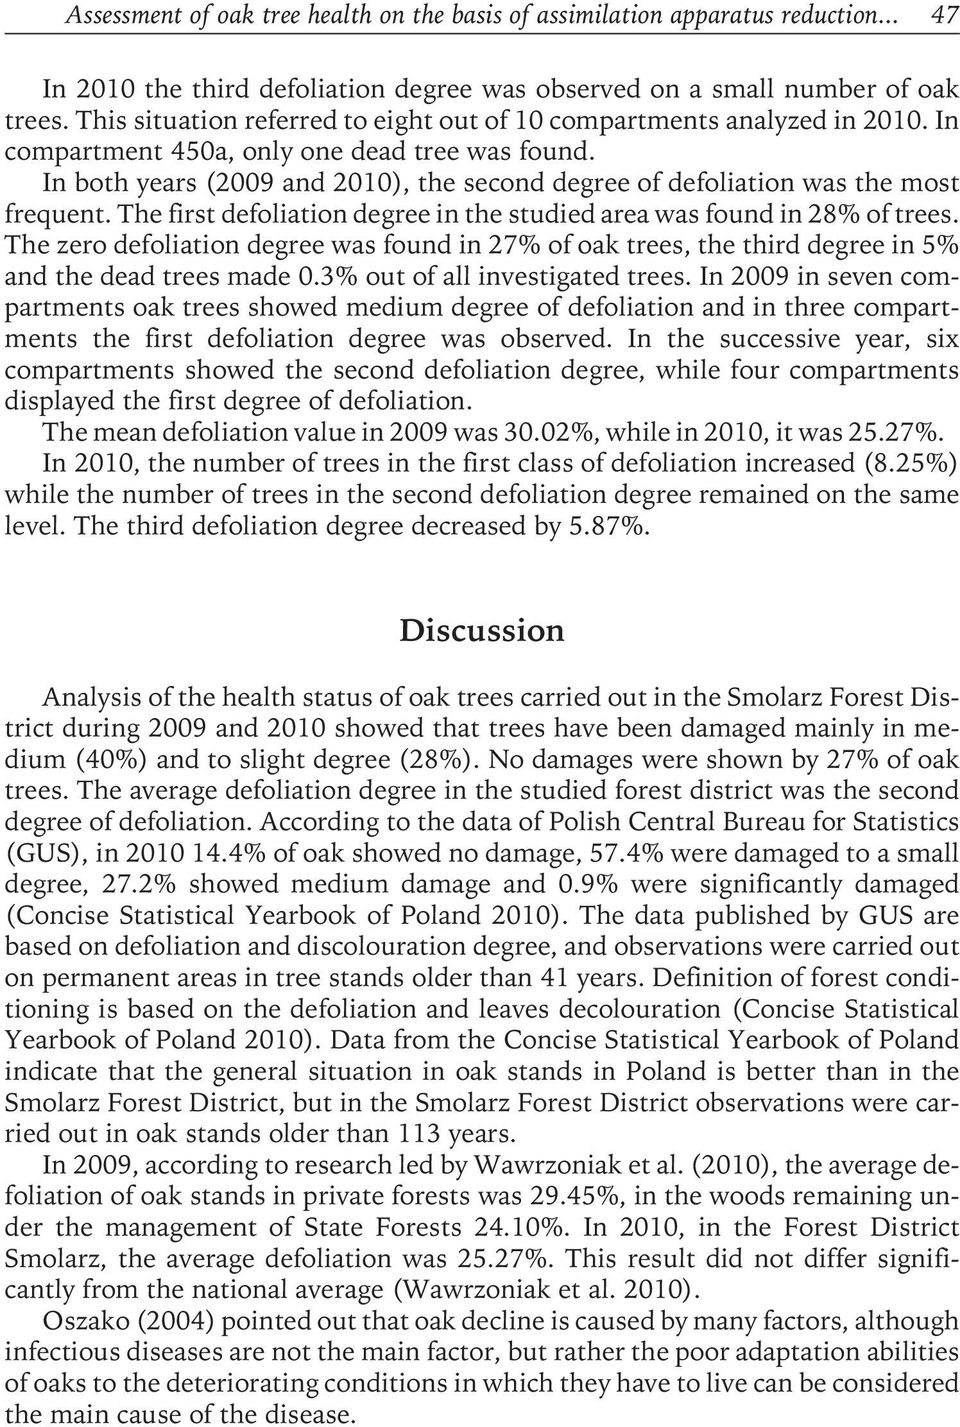 In both years (2009 and 2010), the second degree of defoliation was the most frequent. The first defoliation degree in the studied area was found in 28% of trees.